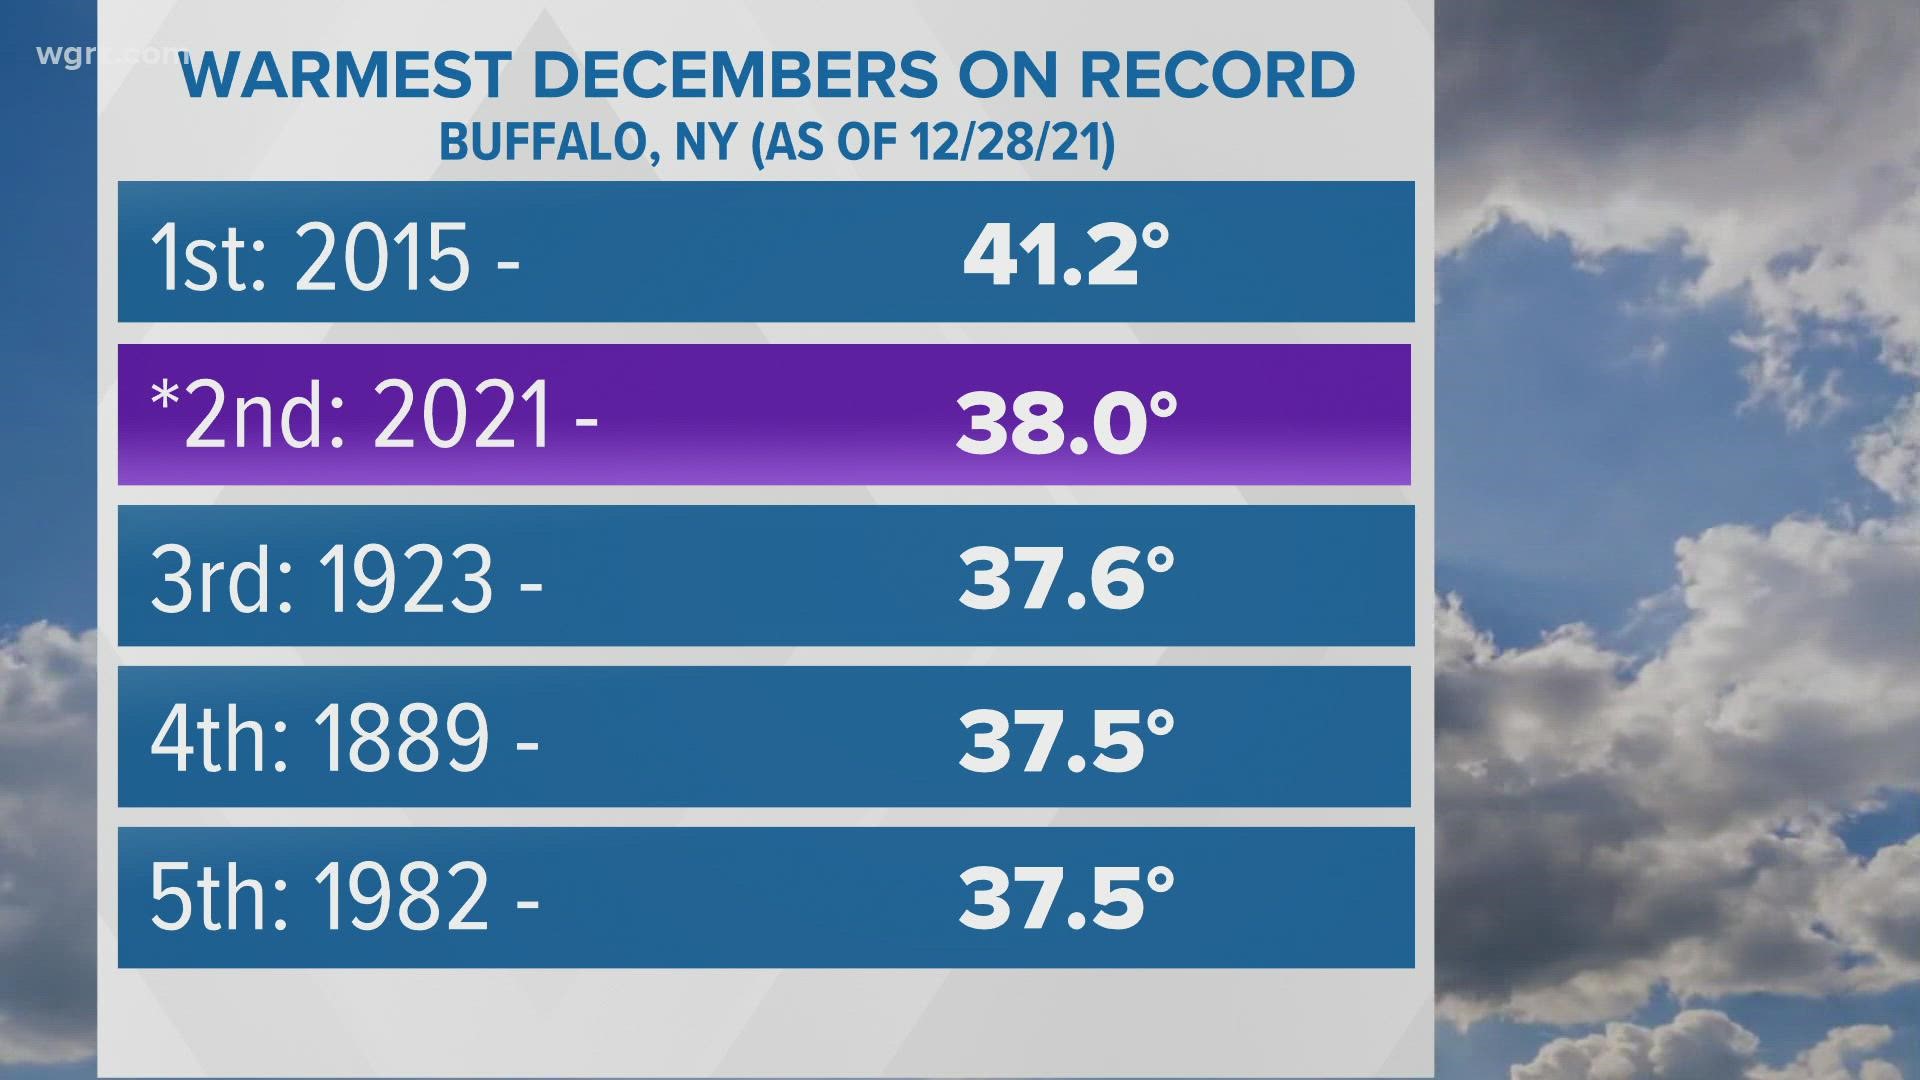 This month will end up ranking as one of the top three warmest Decembers on record for the city.